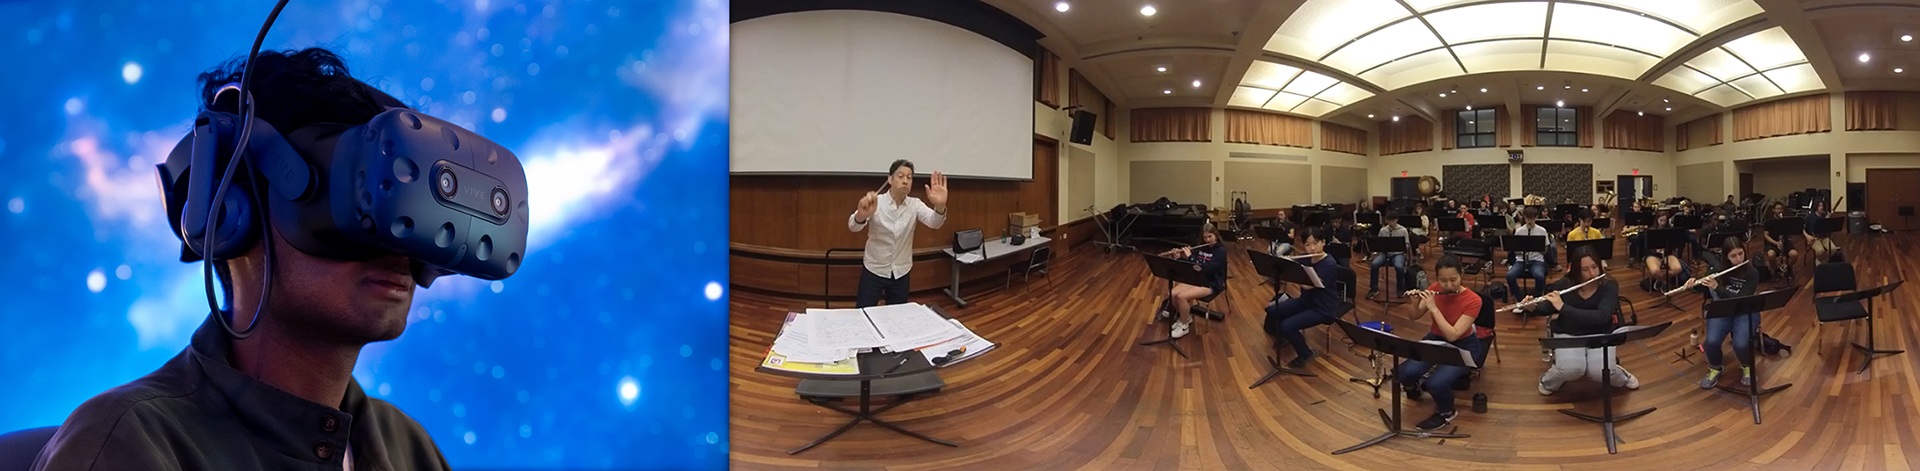 A Student experimented with VR headset and 360 image